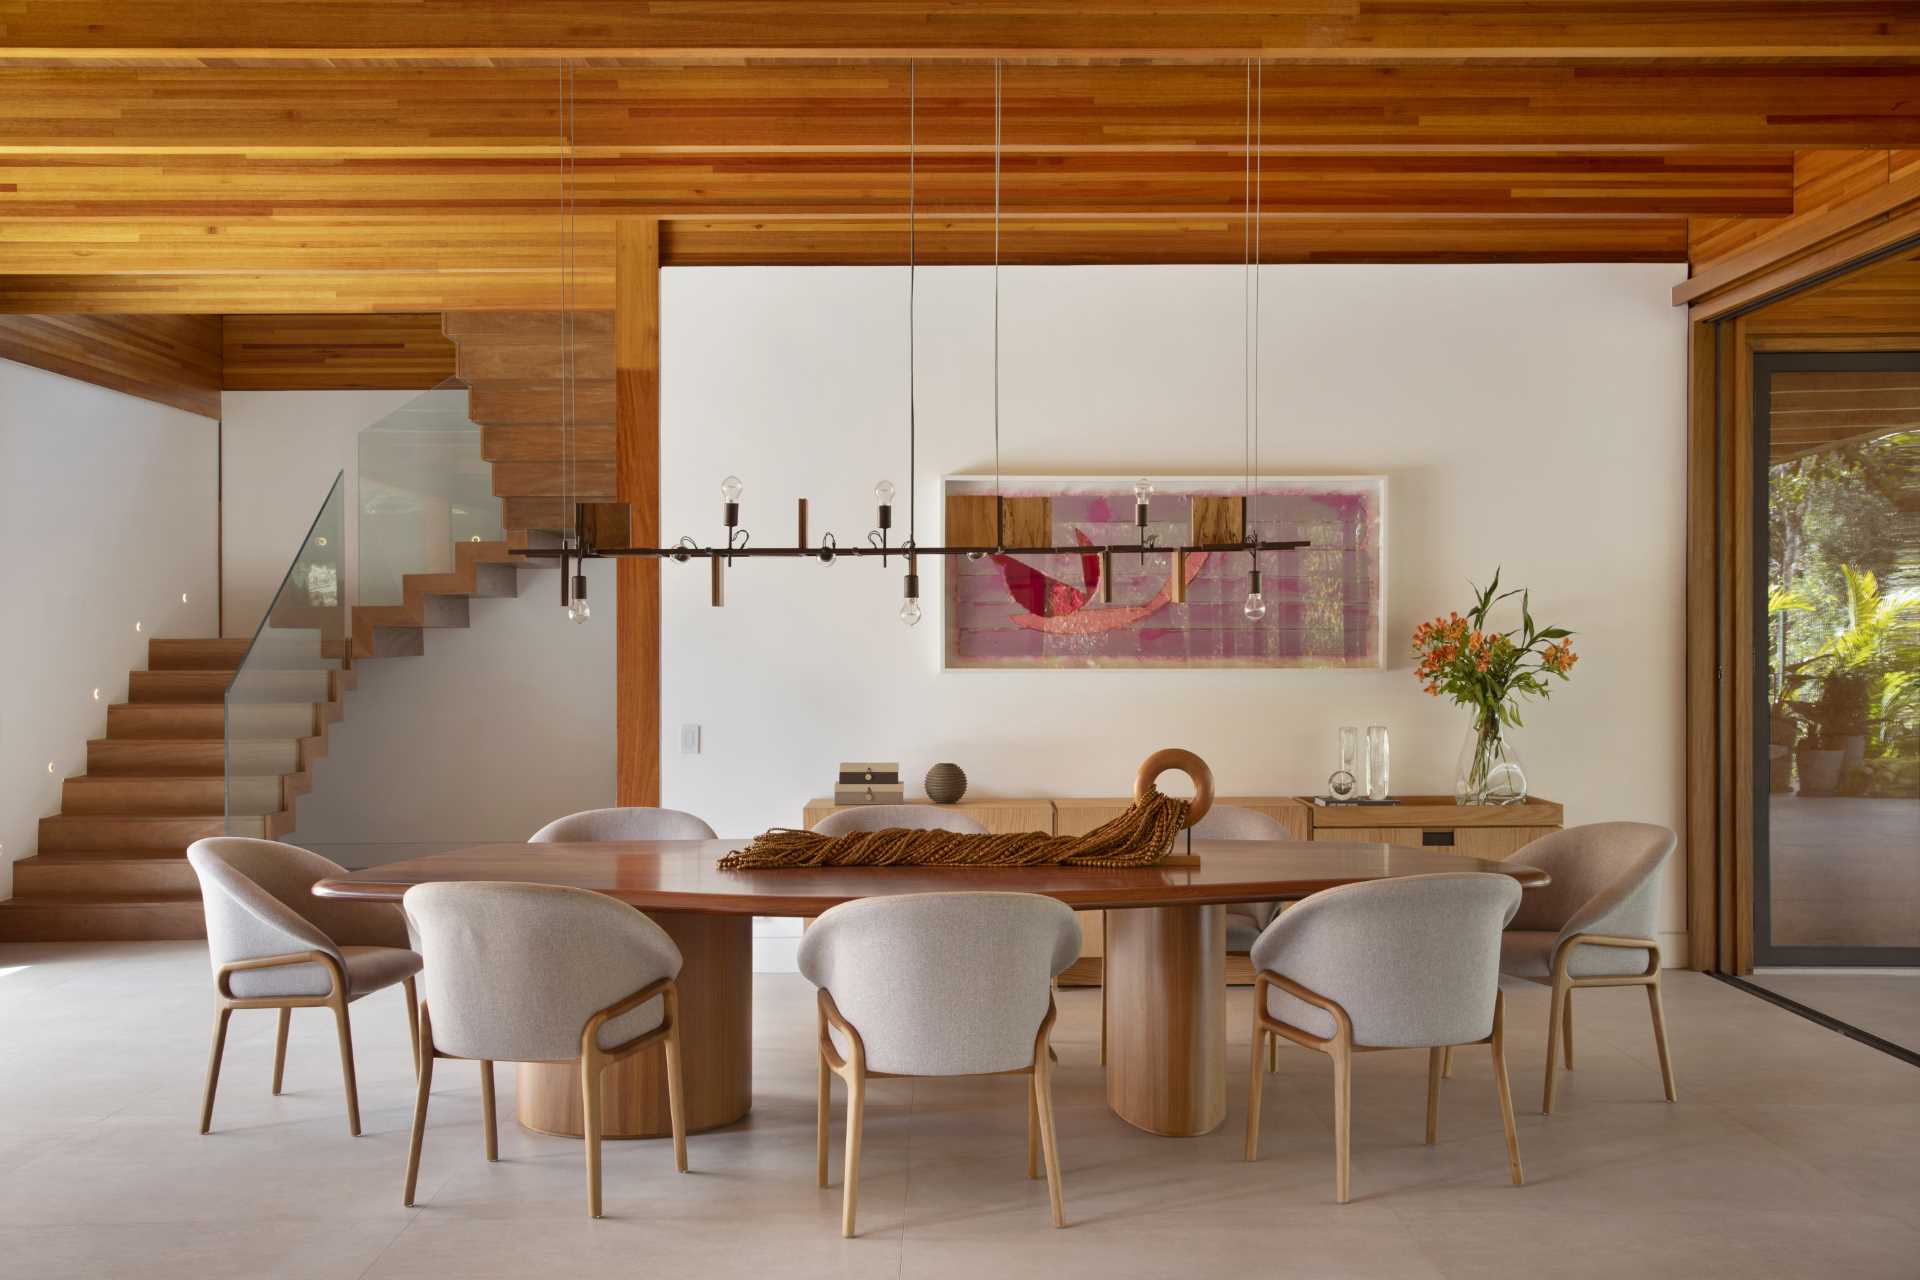 A modern dining room furnished with a wood table, while the floor is an Italian porcelain tile in a large format with a sandy tone.